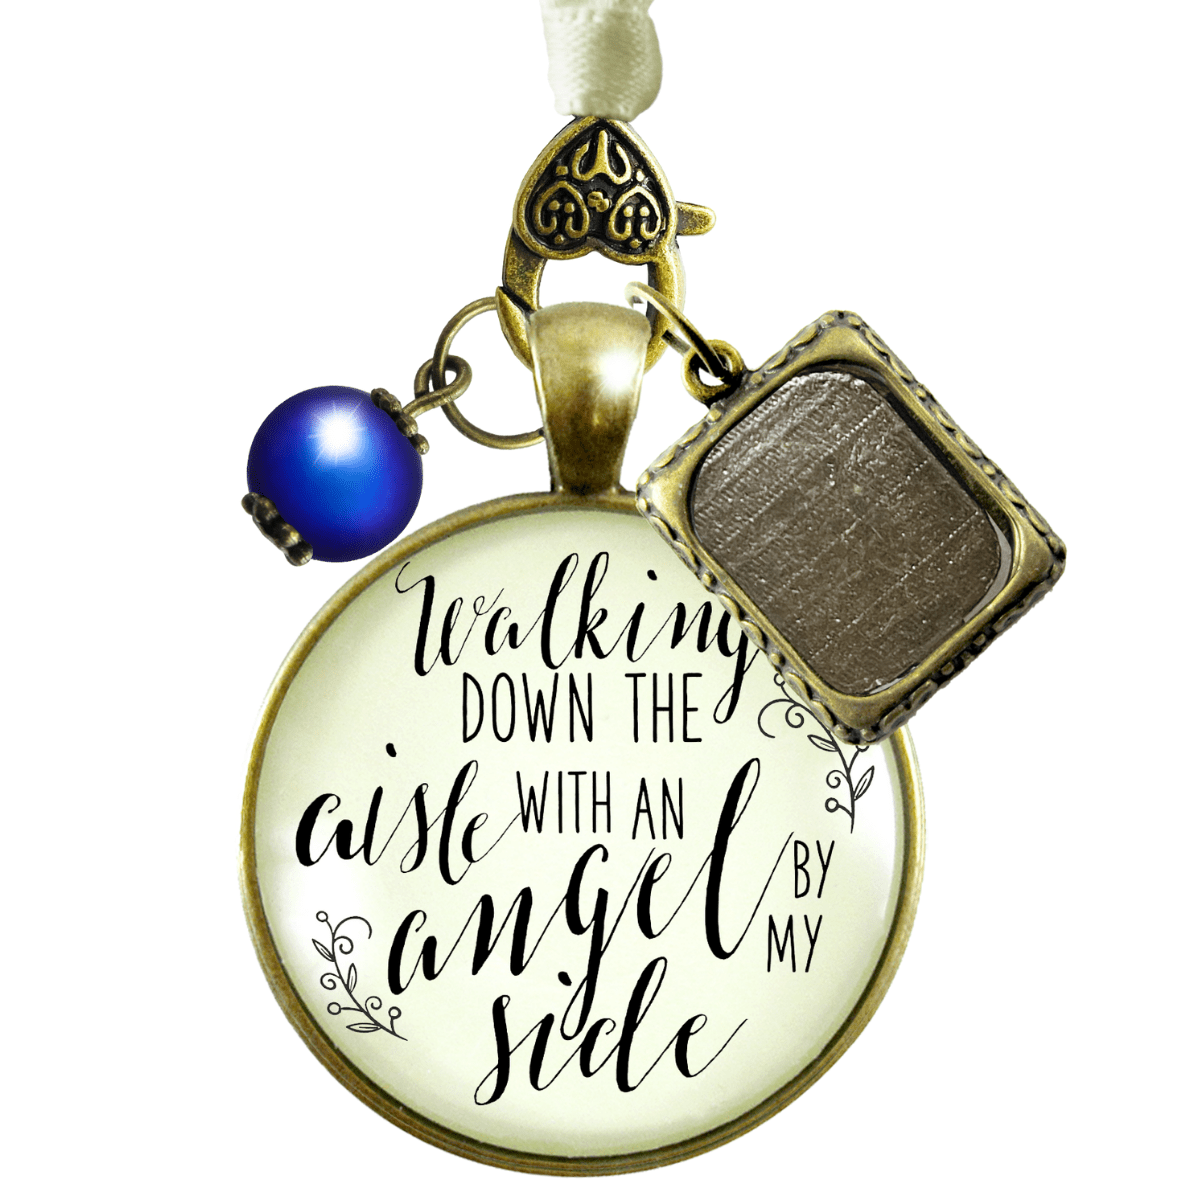 Walking Down The Aisle With An Angel By My Side - BRONZE - CREAM - BLUE BEAD - 1 FRAME